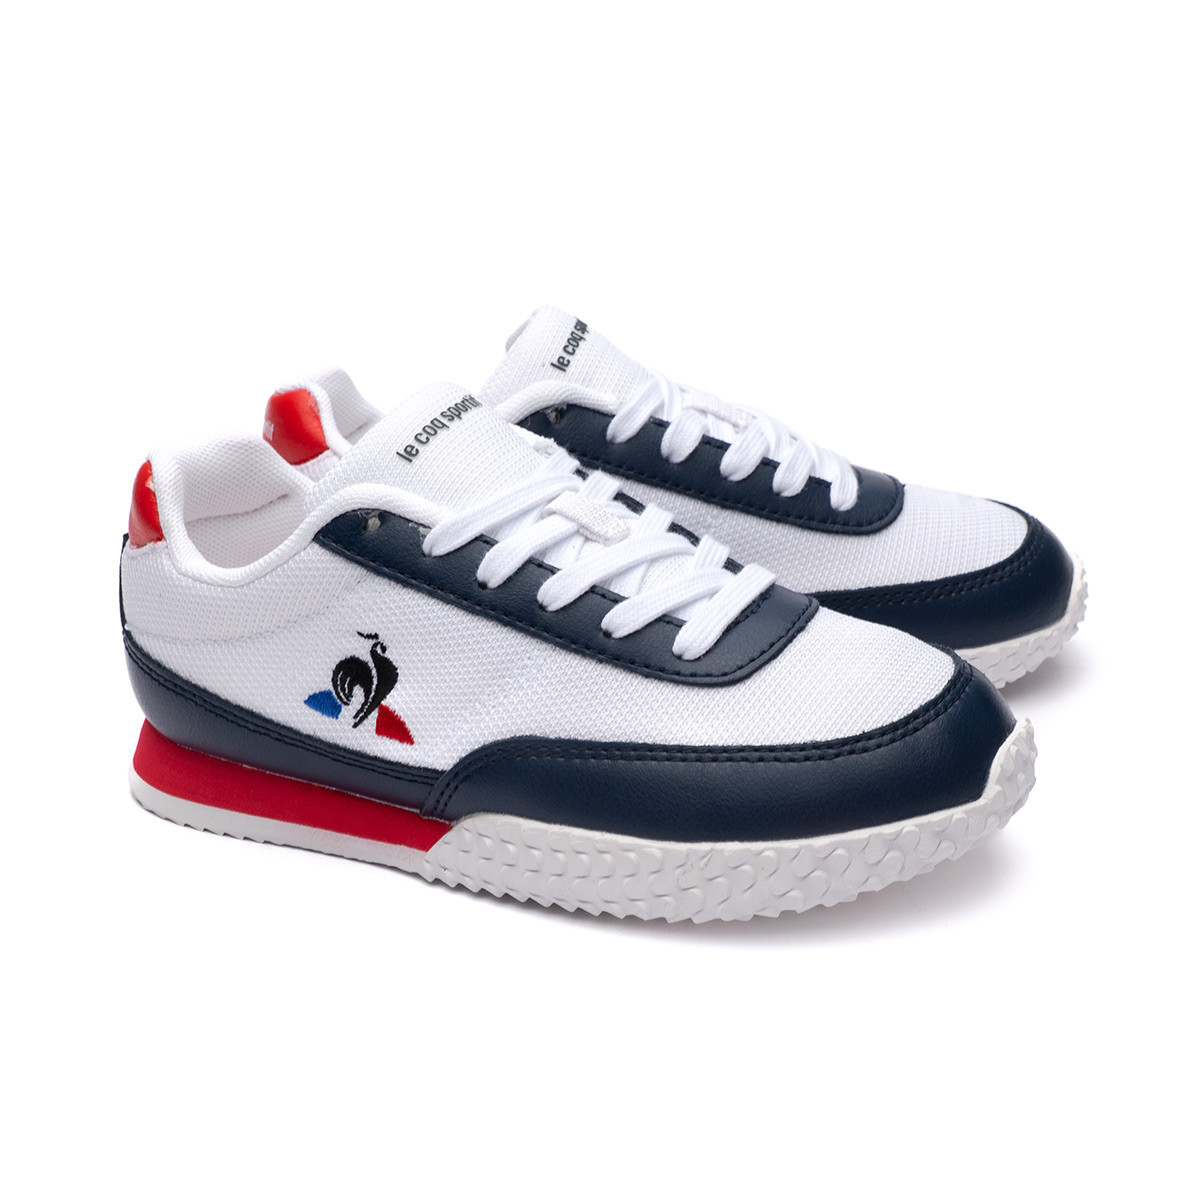 Vervelend Winst Signaal Trainers Le coq sportif Veloce Optical White - Fútbol Emotion